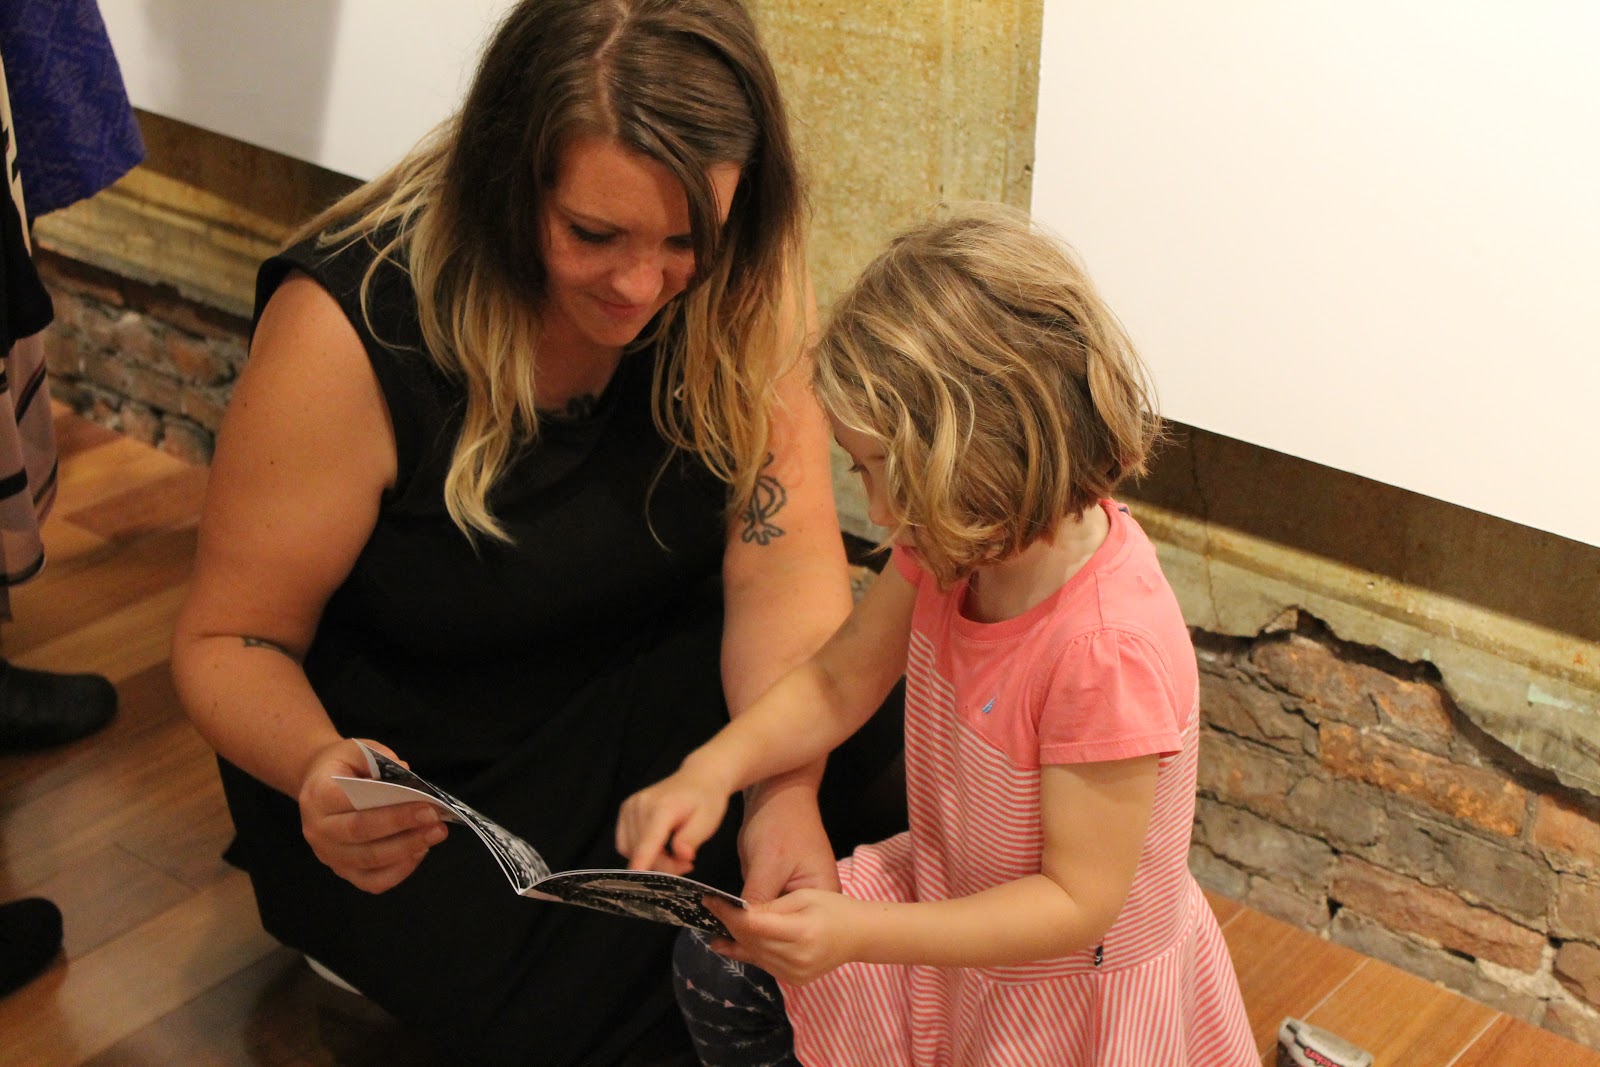 Artist Corryn Jackson looking at zines with a 2015 Zine Show attendee.